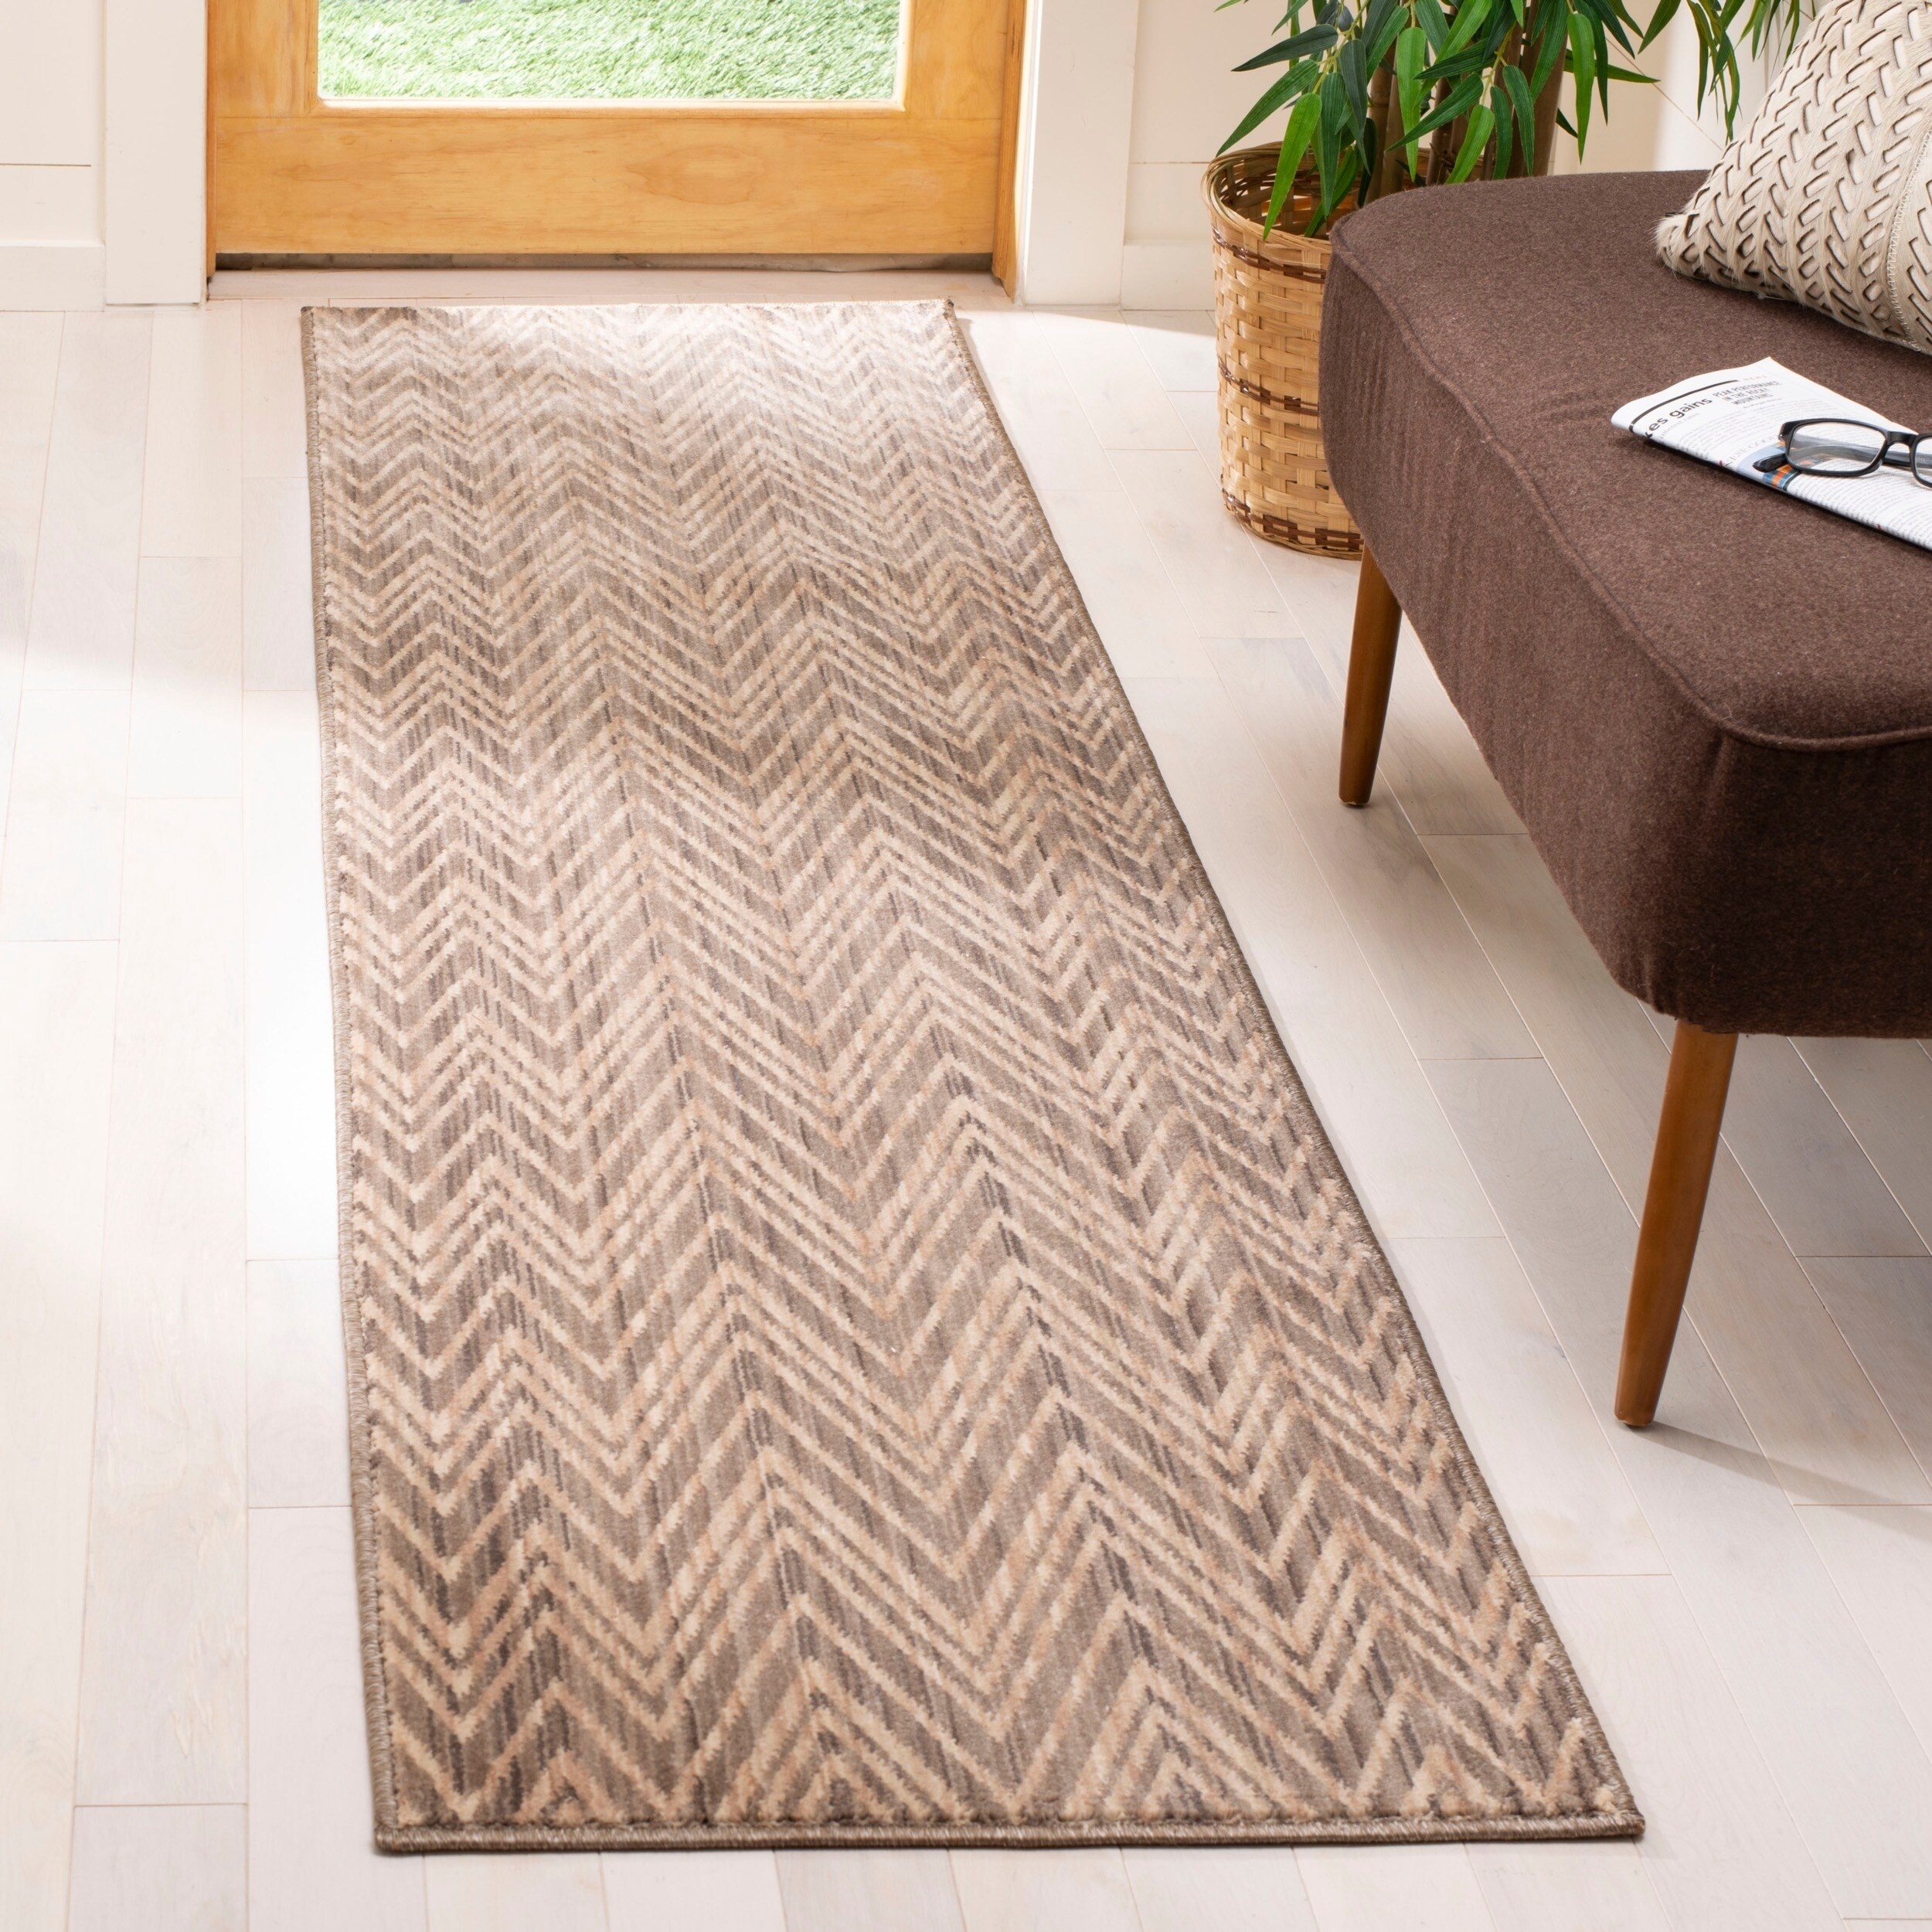 Safavieh Infinity Taupe/ Beige Polyester Rug (2 X 8)